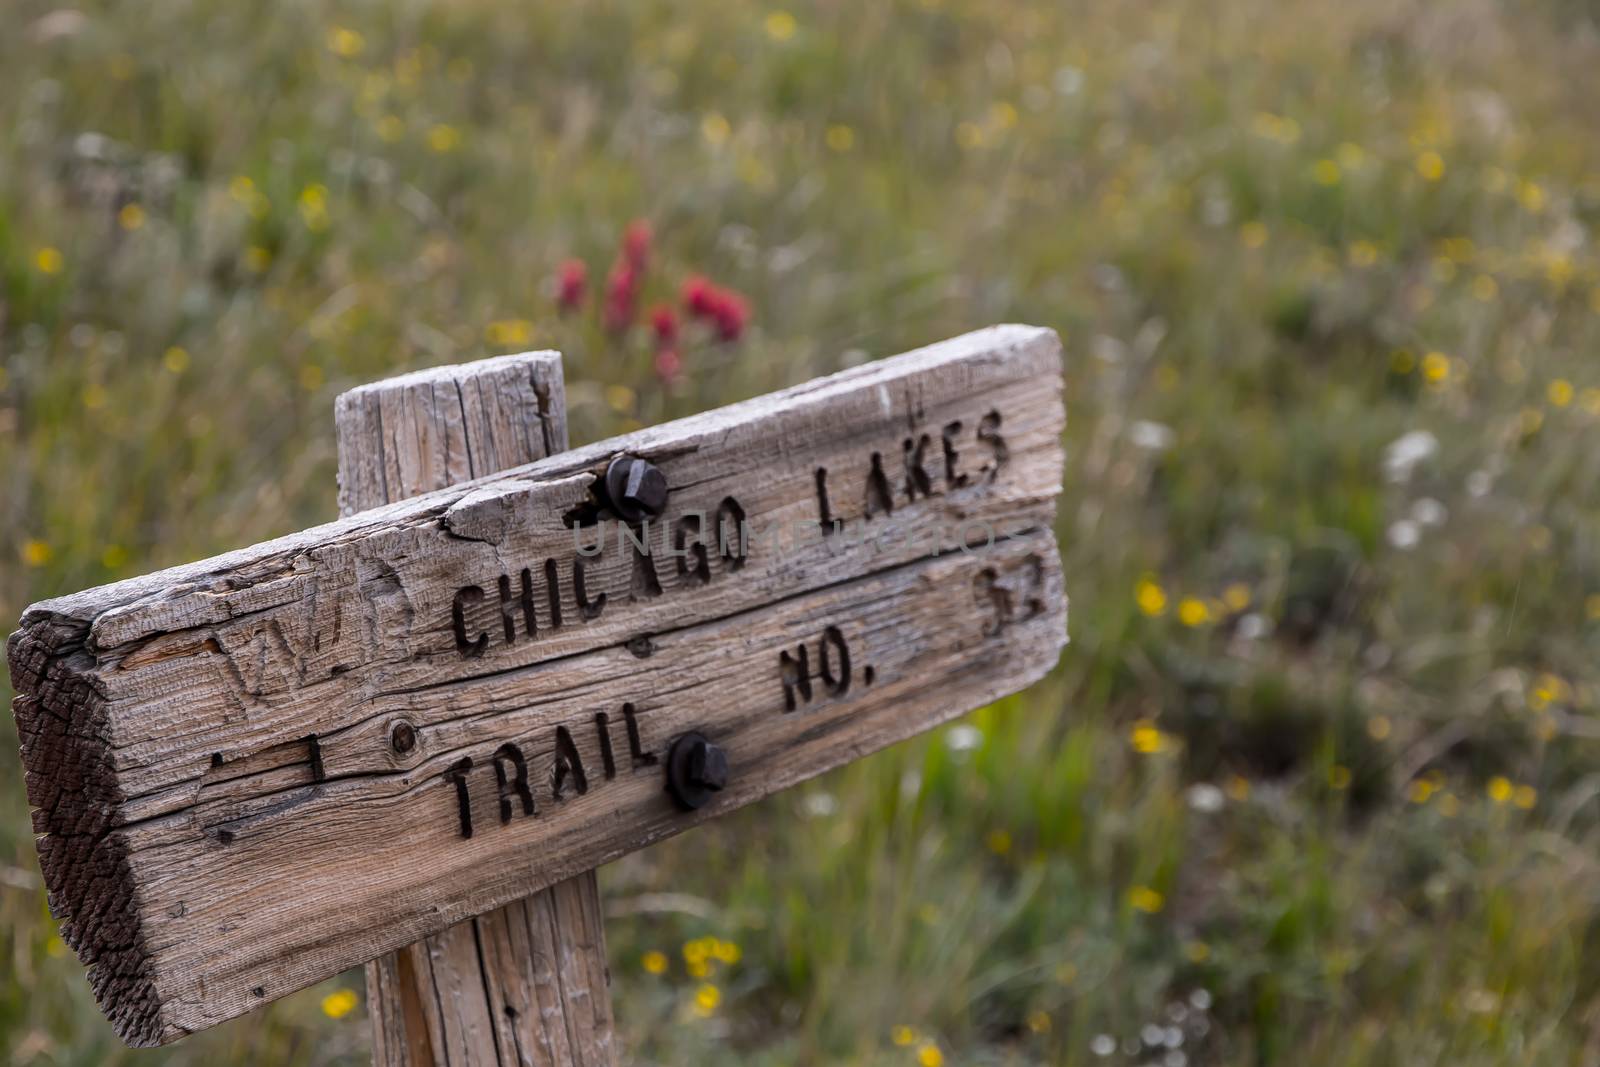 One of the old signs for the trail that leads to Chicago Lakes in the Mount Evans Wilderness, surrounded by wildflowers.